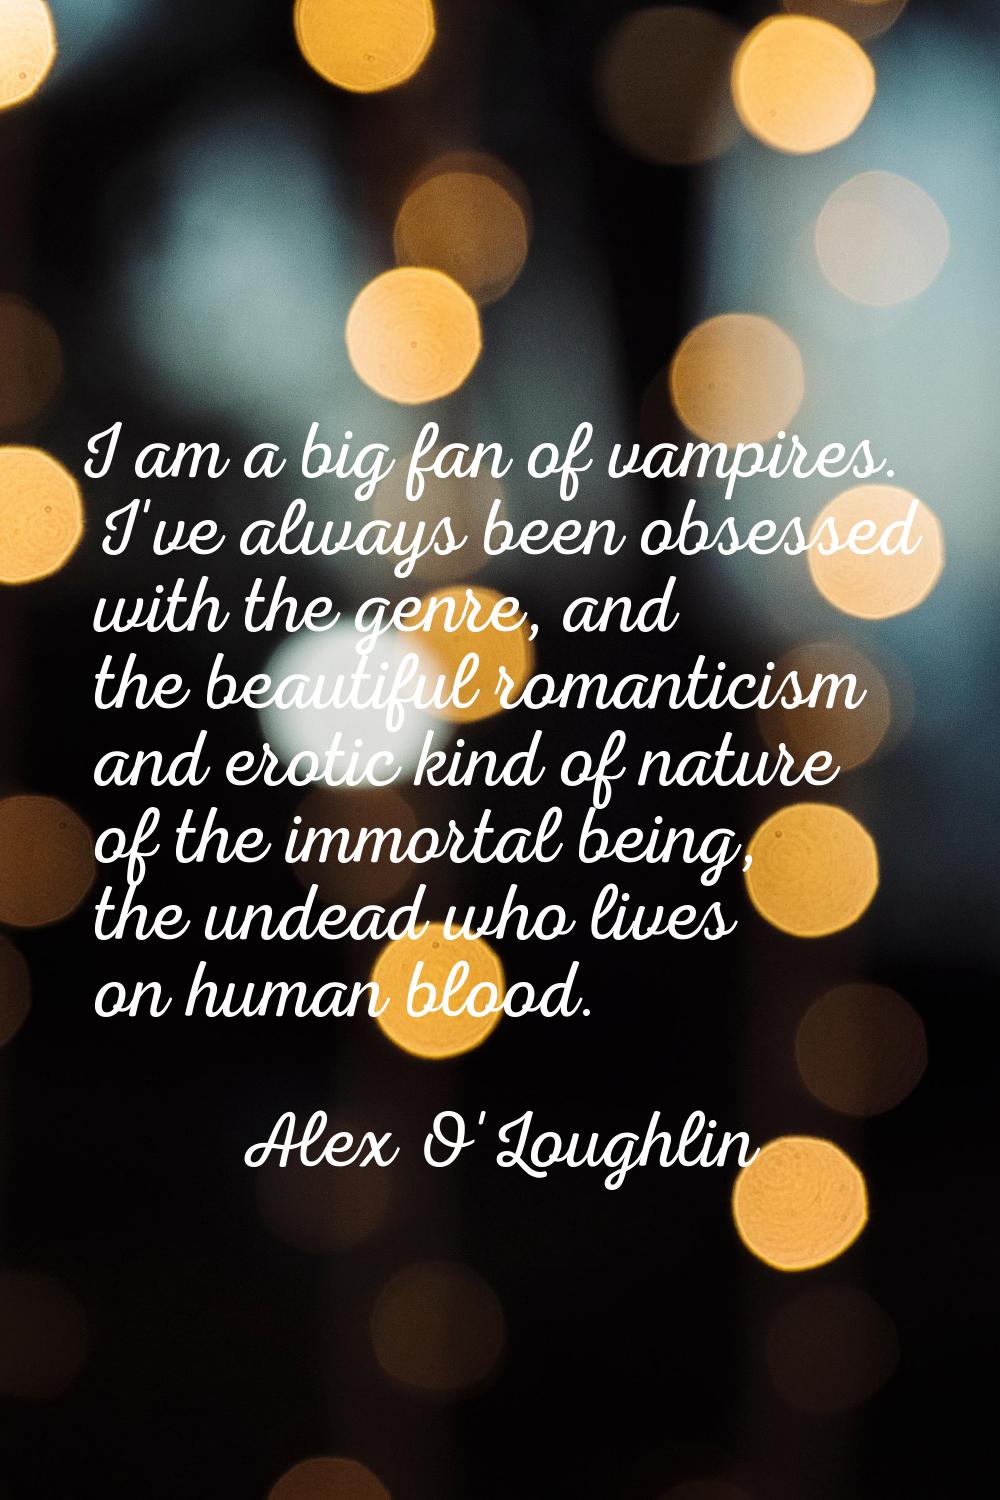 I am a big fan of vampires. I've always been obsessed with the genre, and the beautiful romanticism